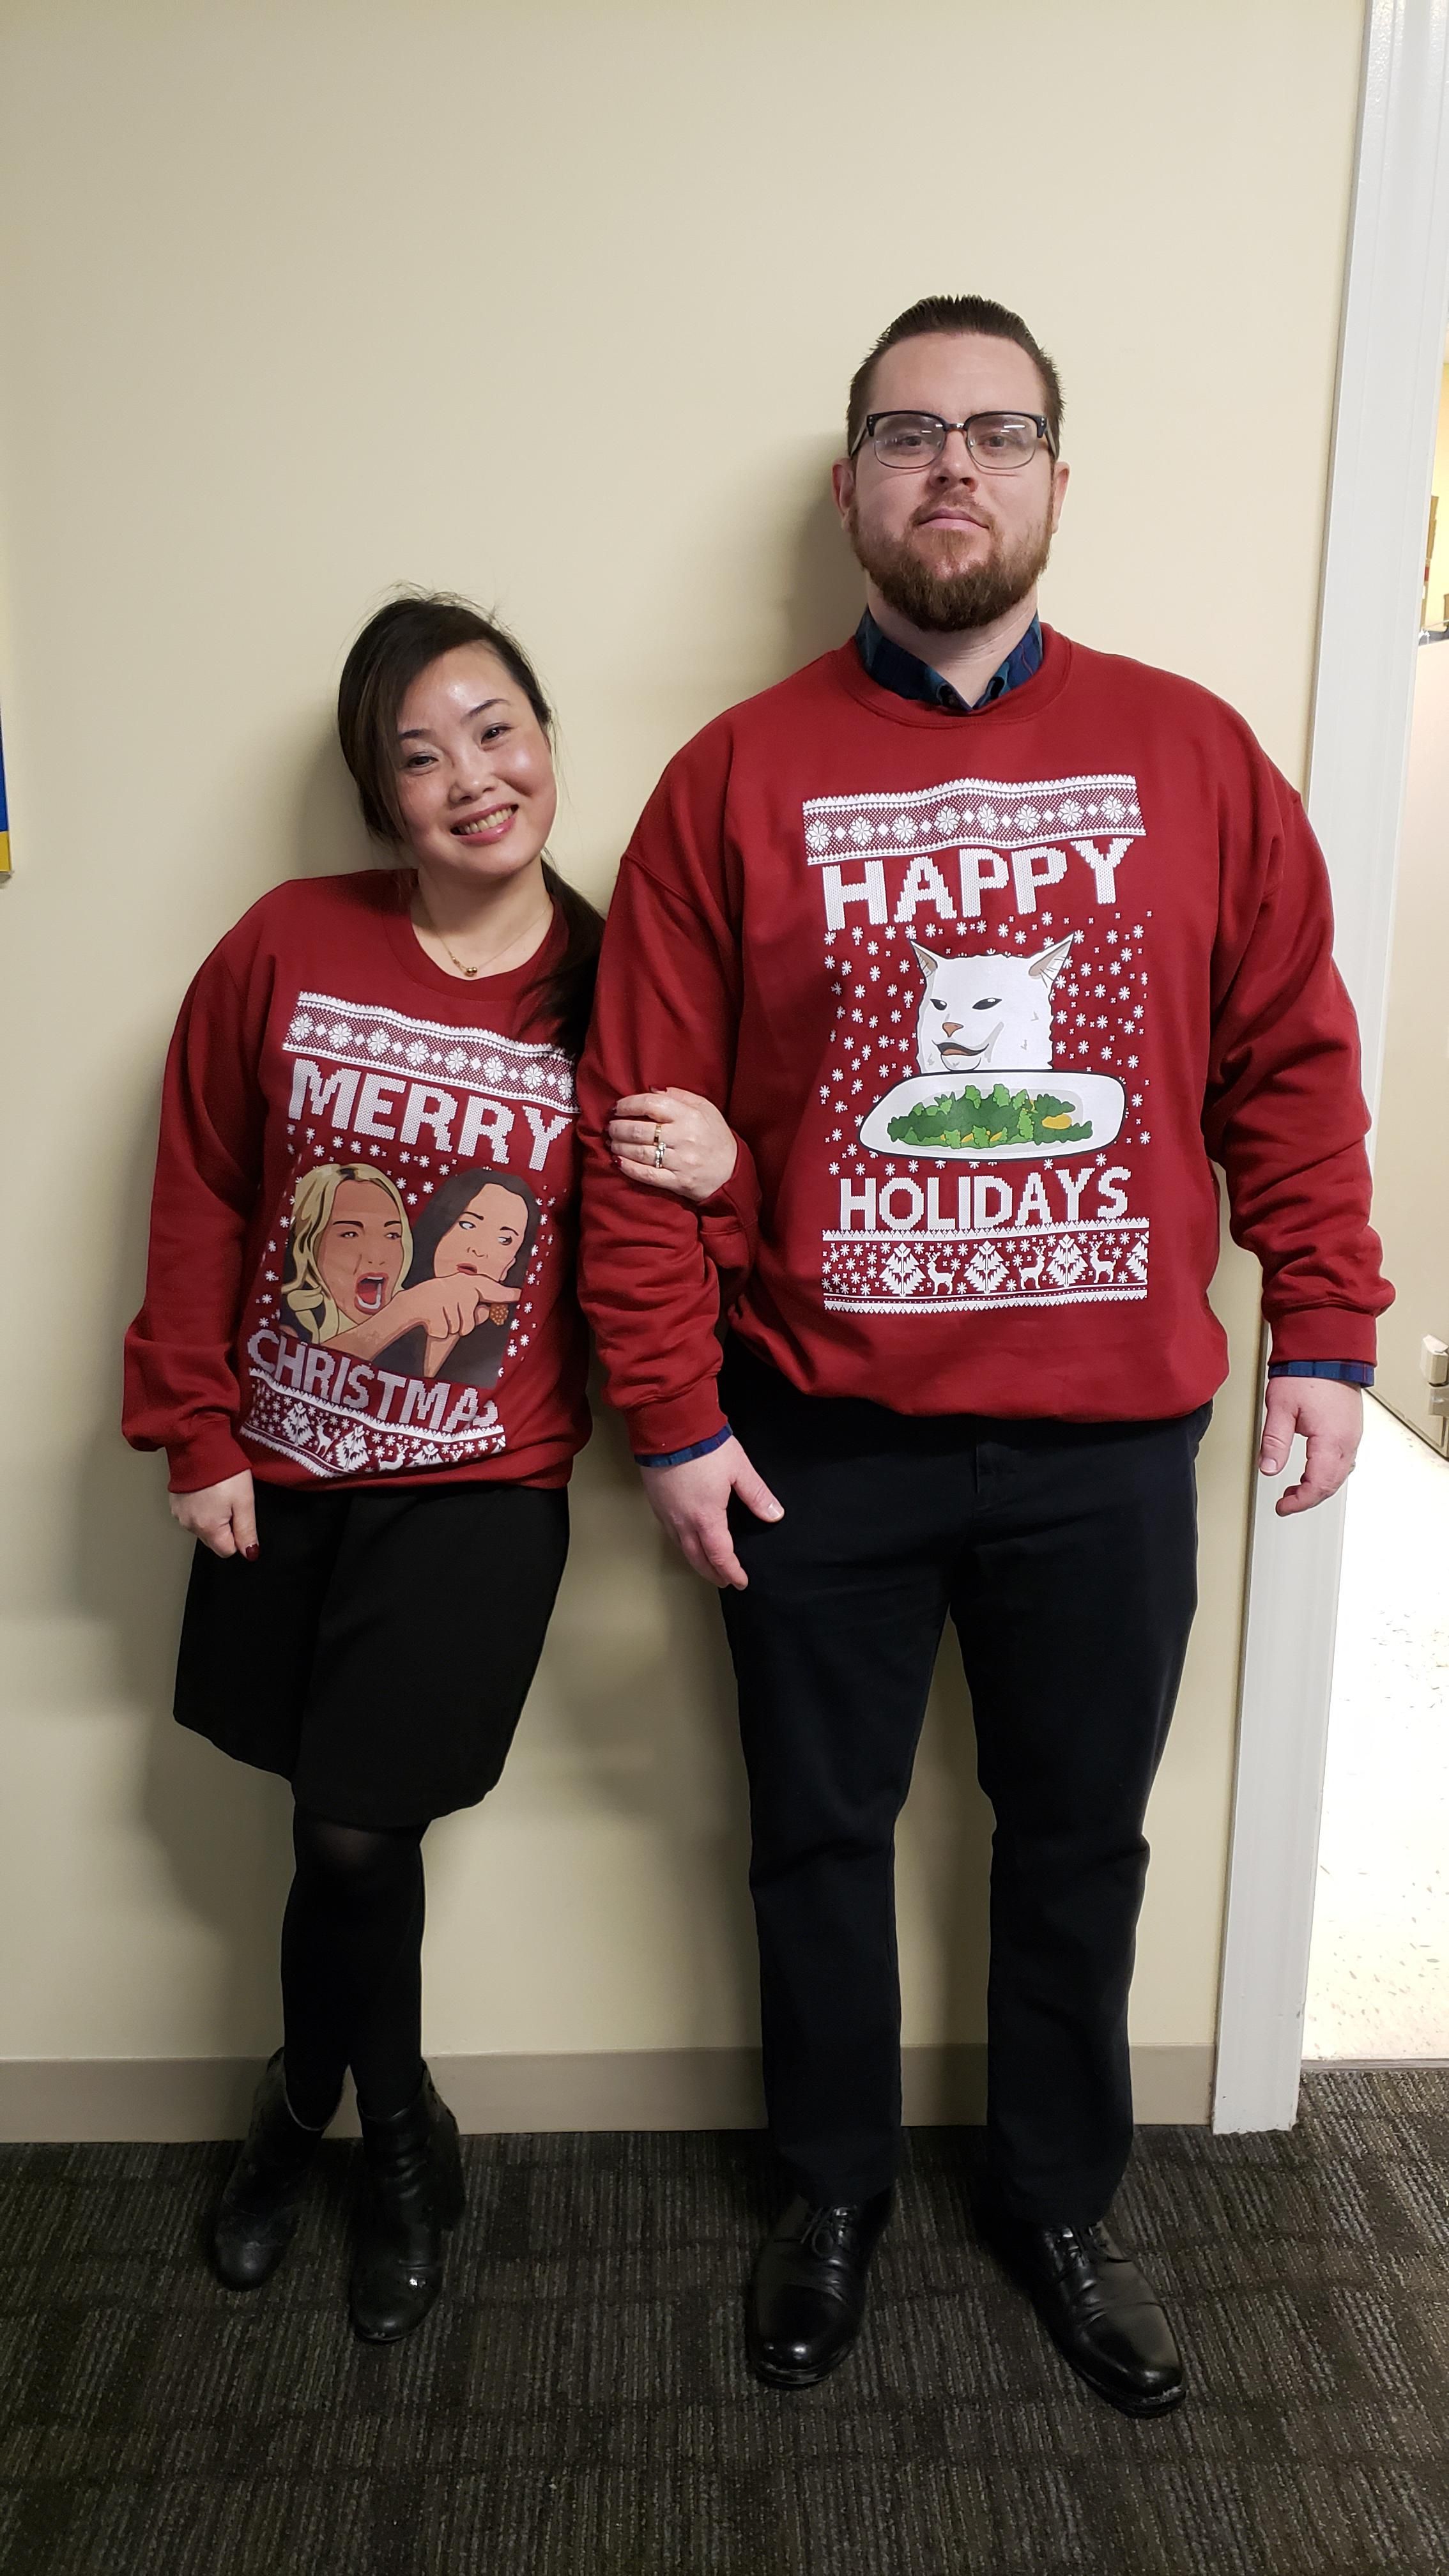 Merry Christmas from my hilarious co workers!